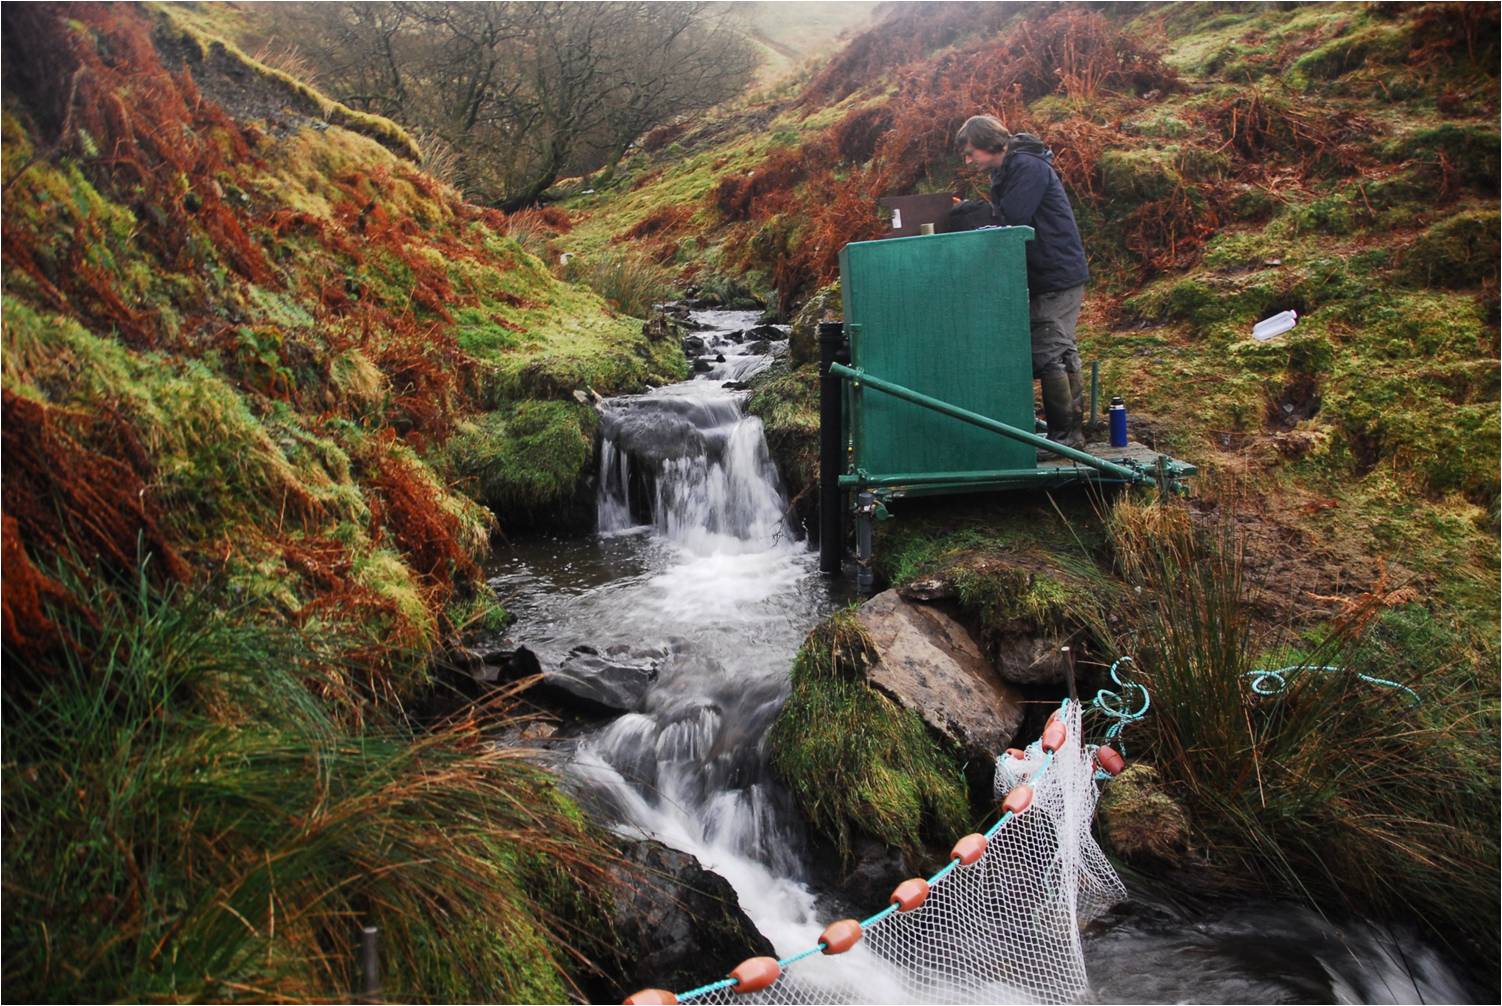 Monitoring water quality at the LI7 (Nant Rhesfa) water quality station © NA Chappell